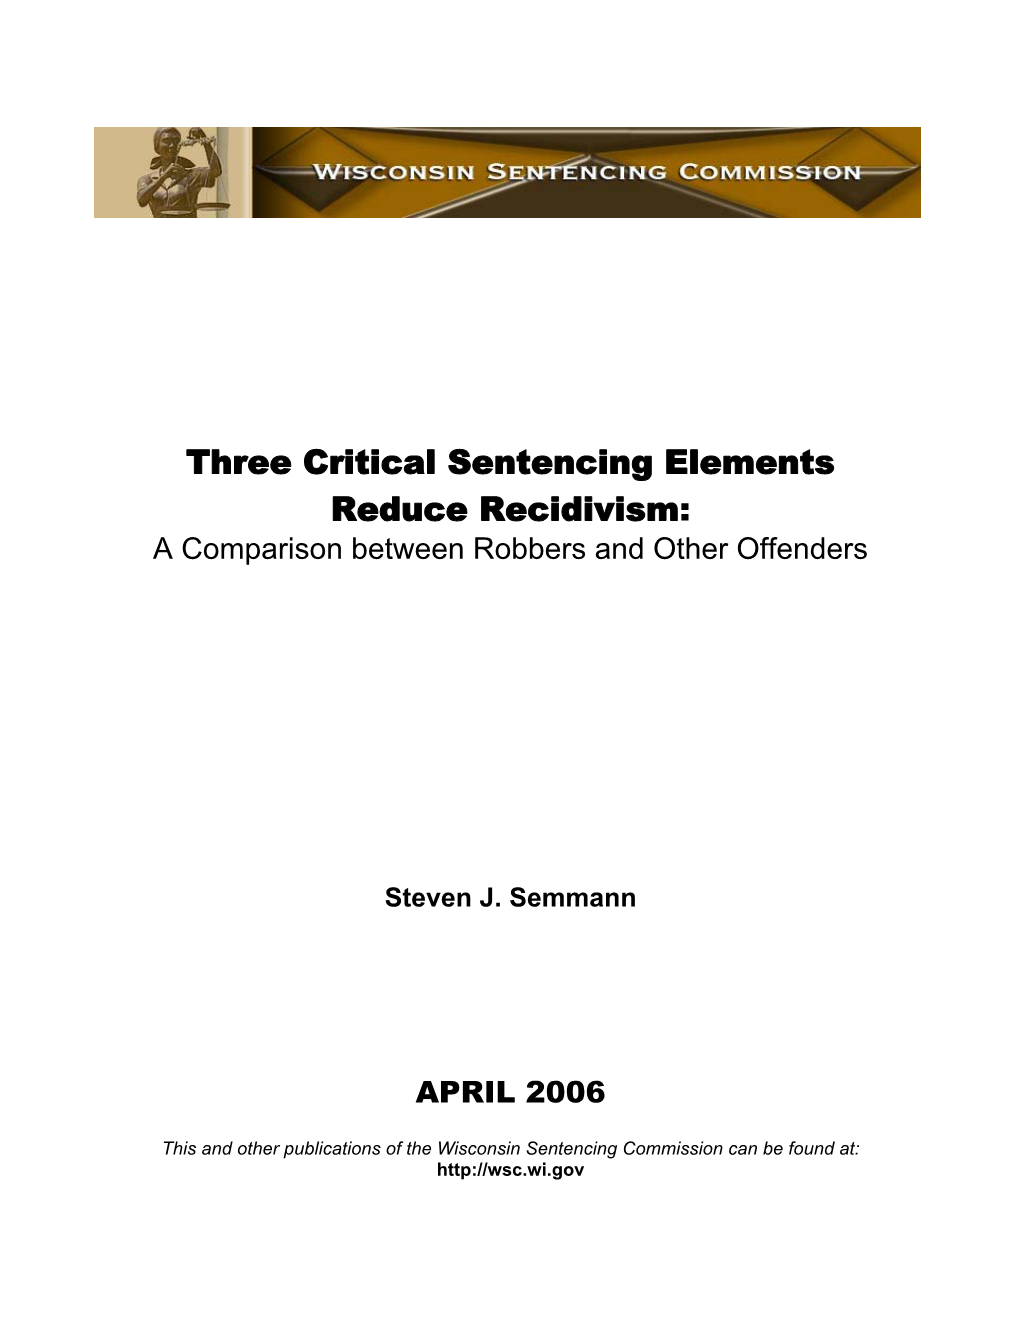 Three Critical Sentencing Elements Reduce Recidivism: a Comparison Between Robbers and Other Offenders